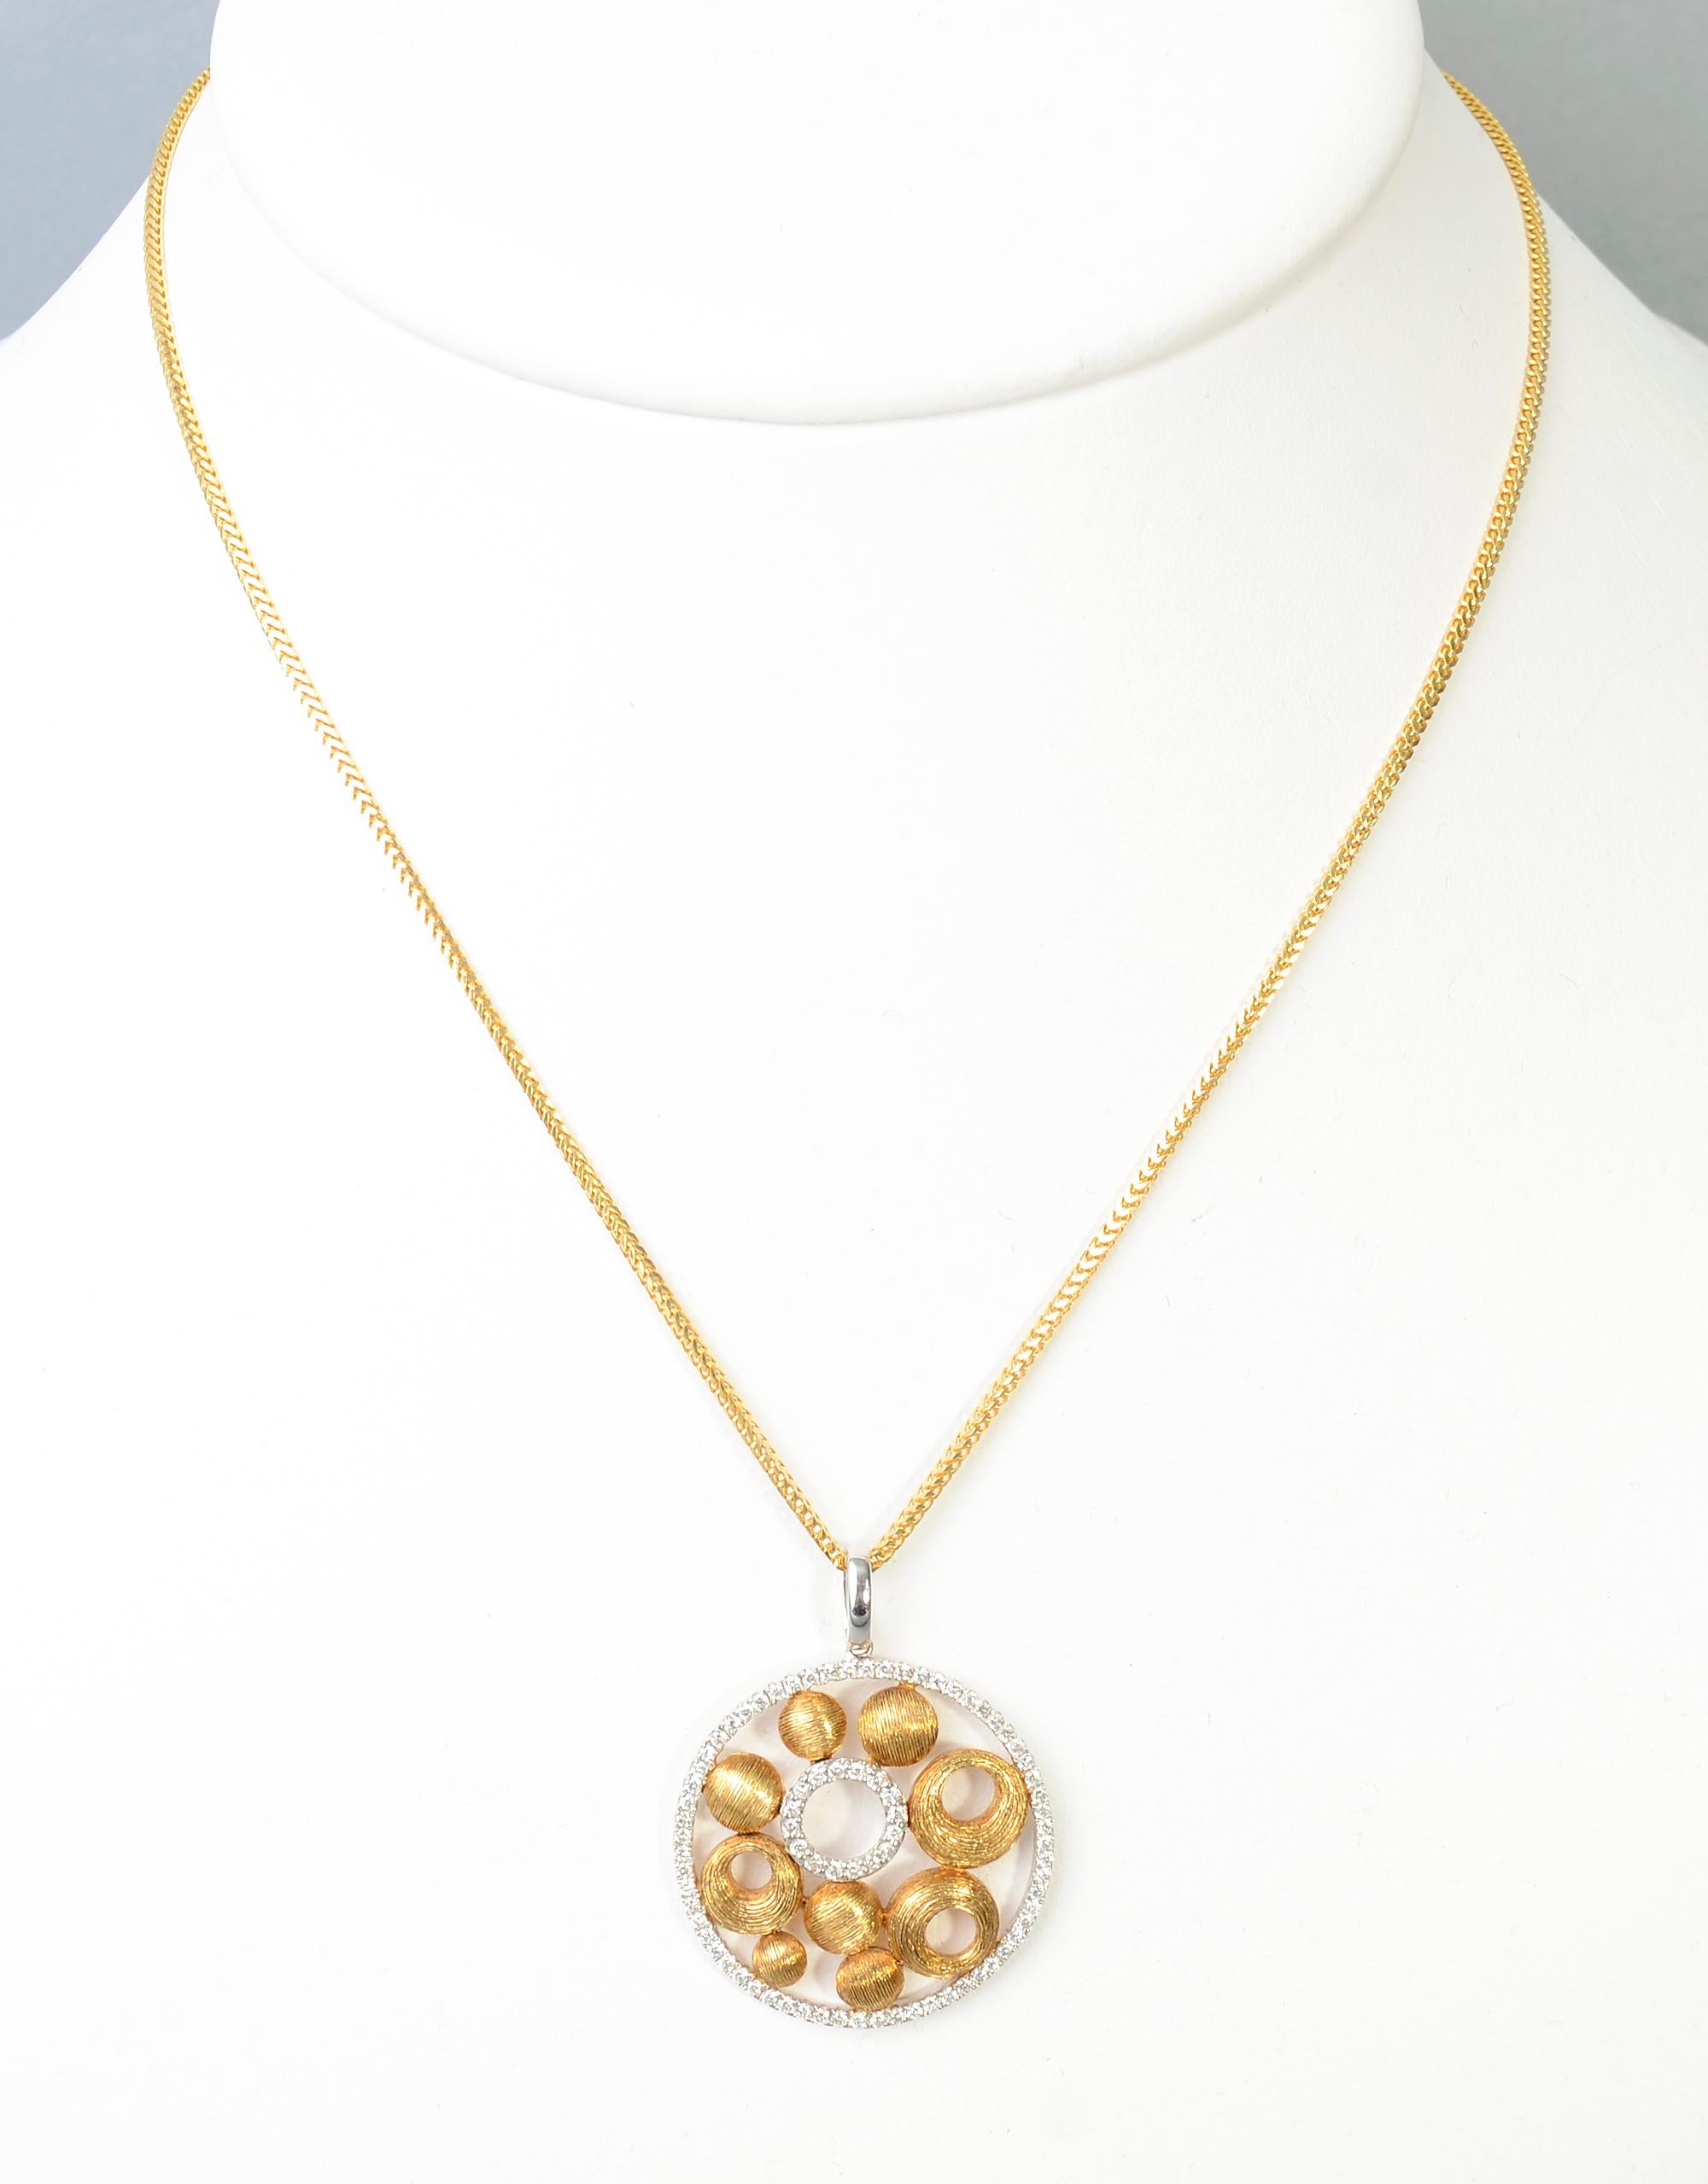 Lovely and unusual 18 karat yellow gold and diamonds pendant necklace. The pendant is 1 1/15